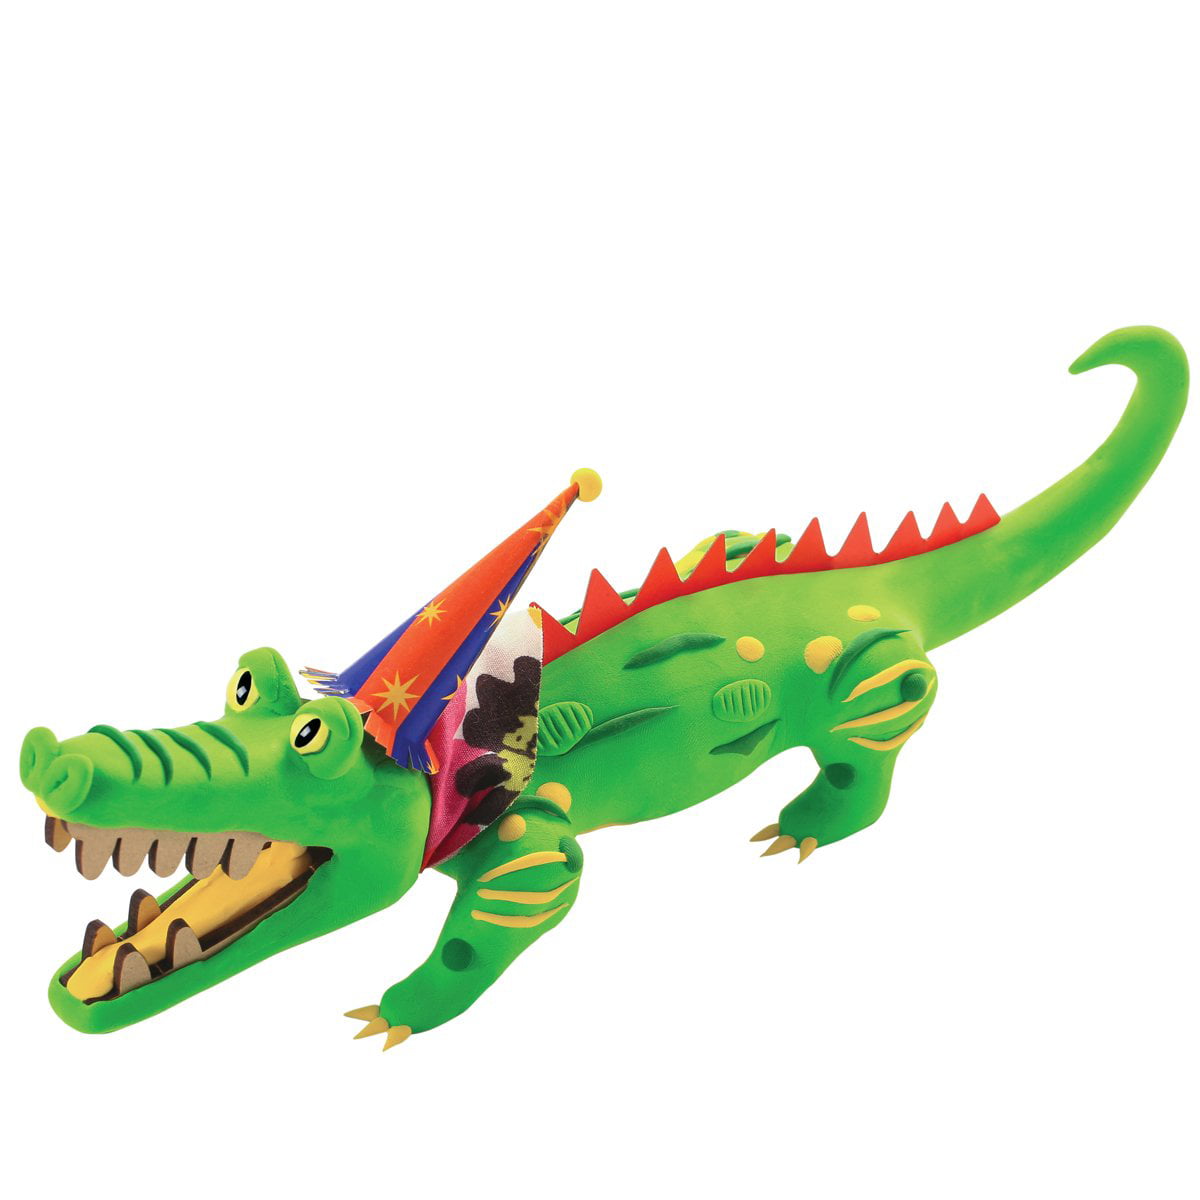 Rainbow Woodden puzzle crocodile shape with alphabet letters and numbers 